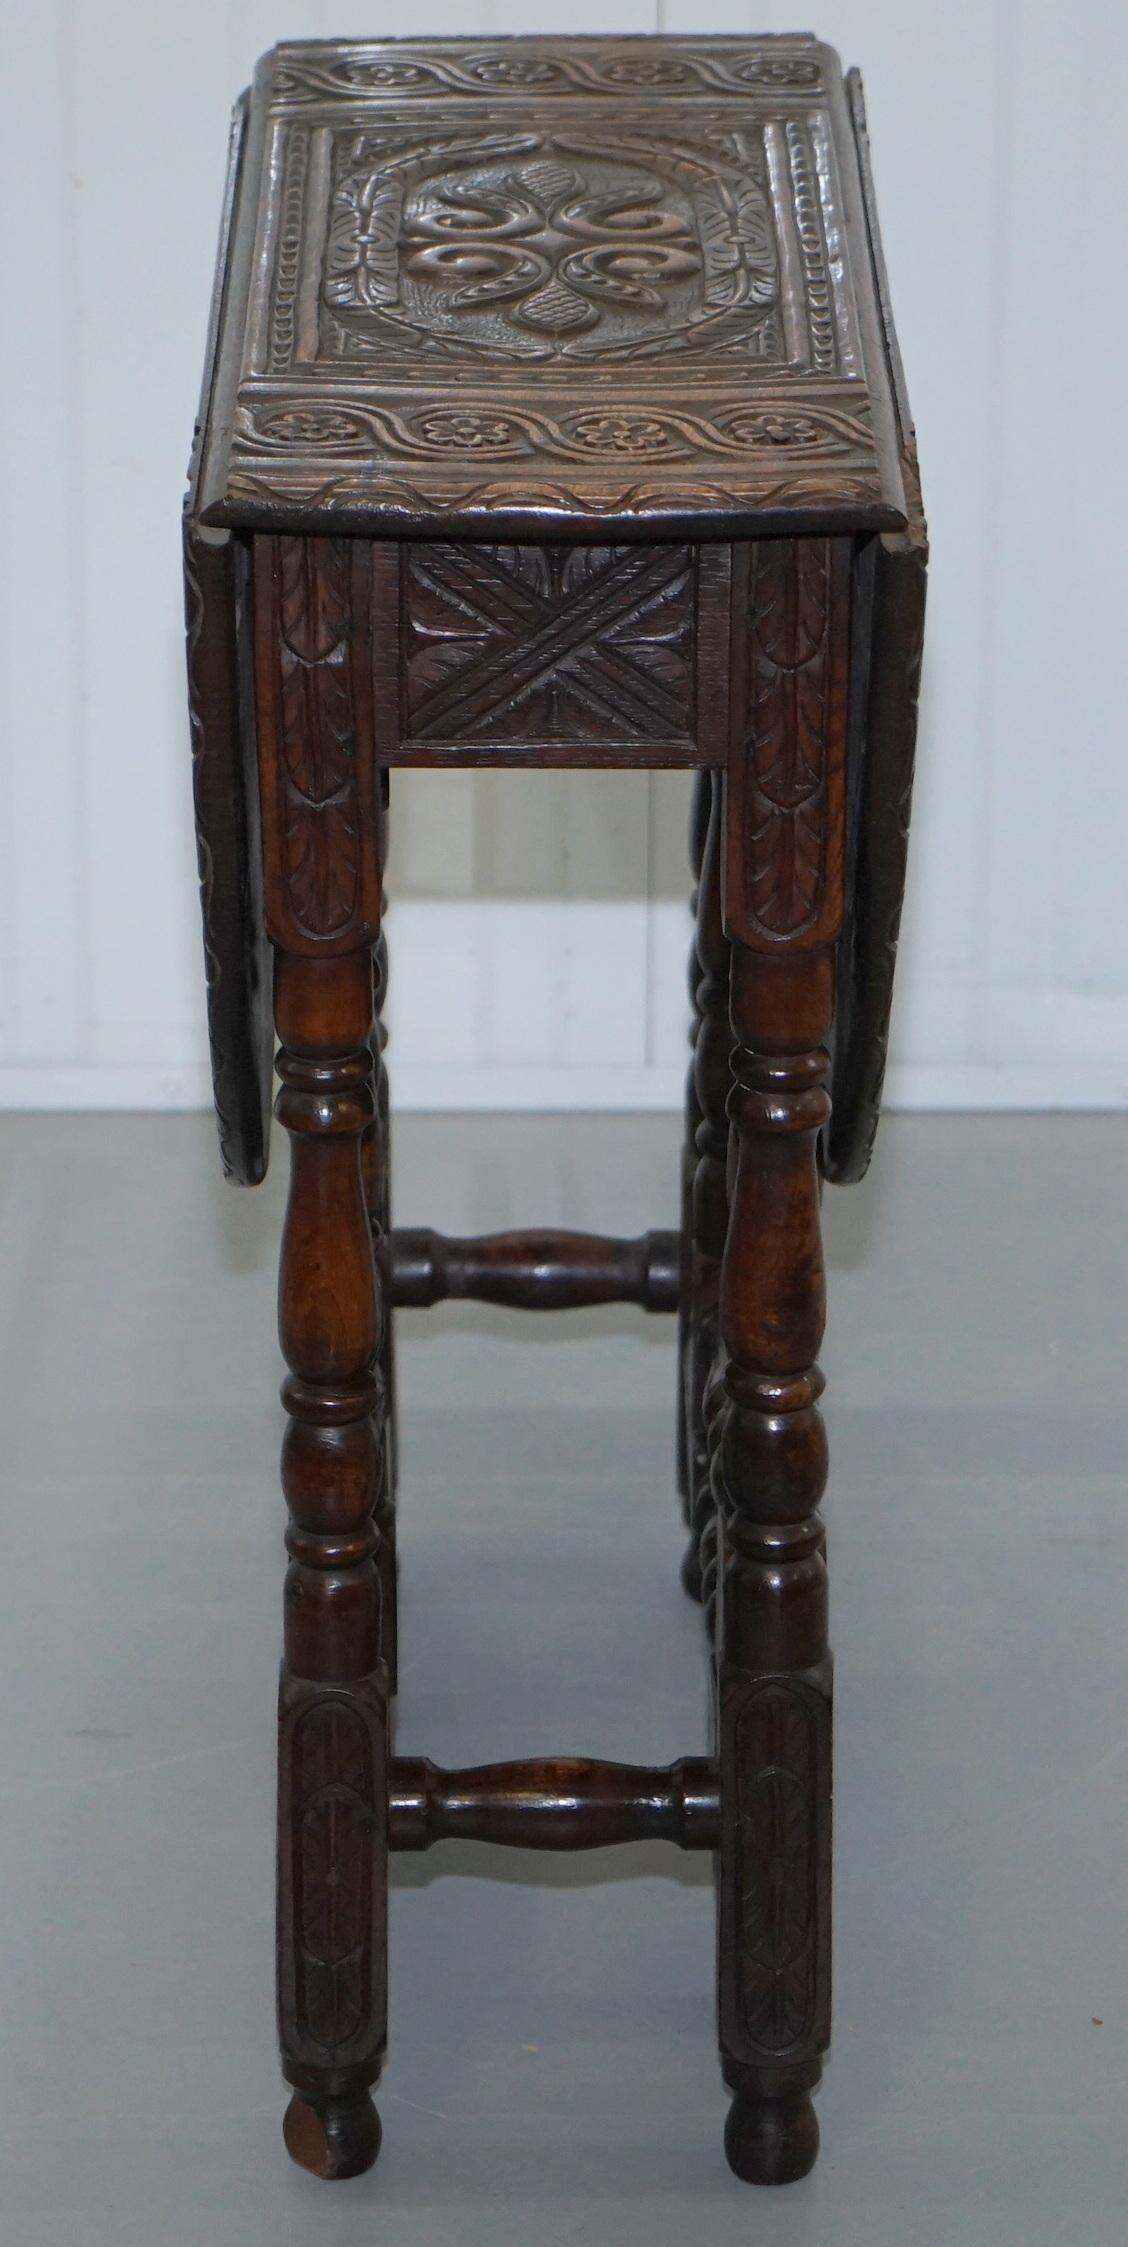 Early 19th Century Rare Find Georgian Hand-Carved Gate Leg Small Occasional Side Table Folding